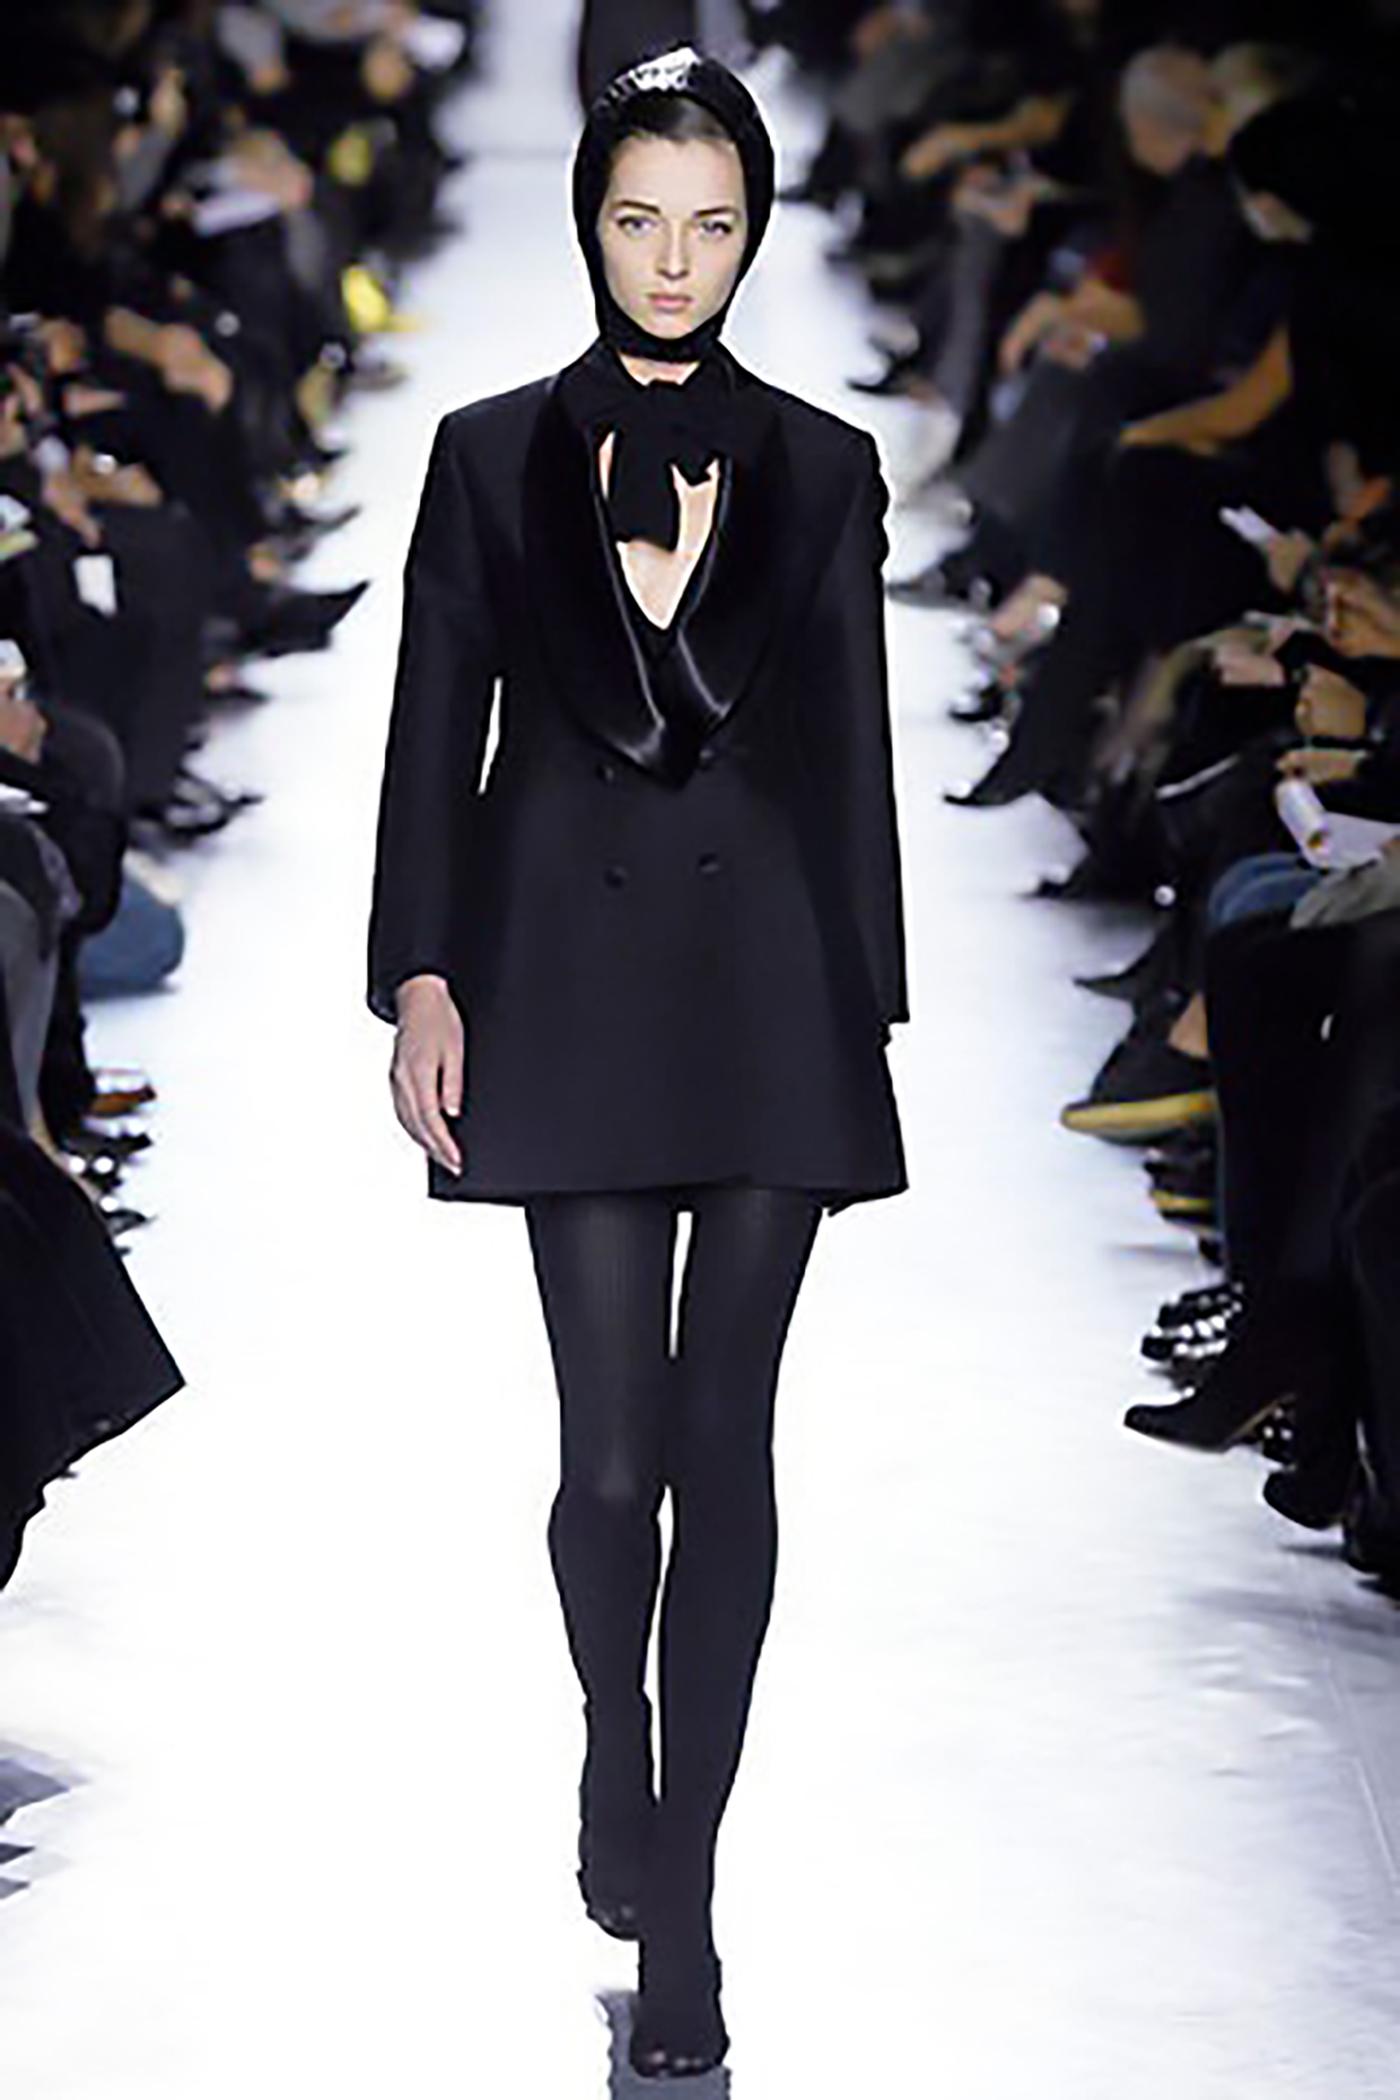 The perfect black tuxedo jacket by Yves Saint Laurent - designed by Stefano Pilati for his 2007 Autumn Winter collection. This Le Smoking style jacket was look number 34 on the runway.

This stunning tuxedo jacket is made from a beautiful silk wool